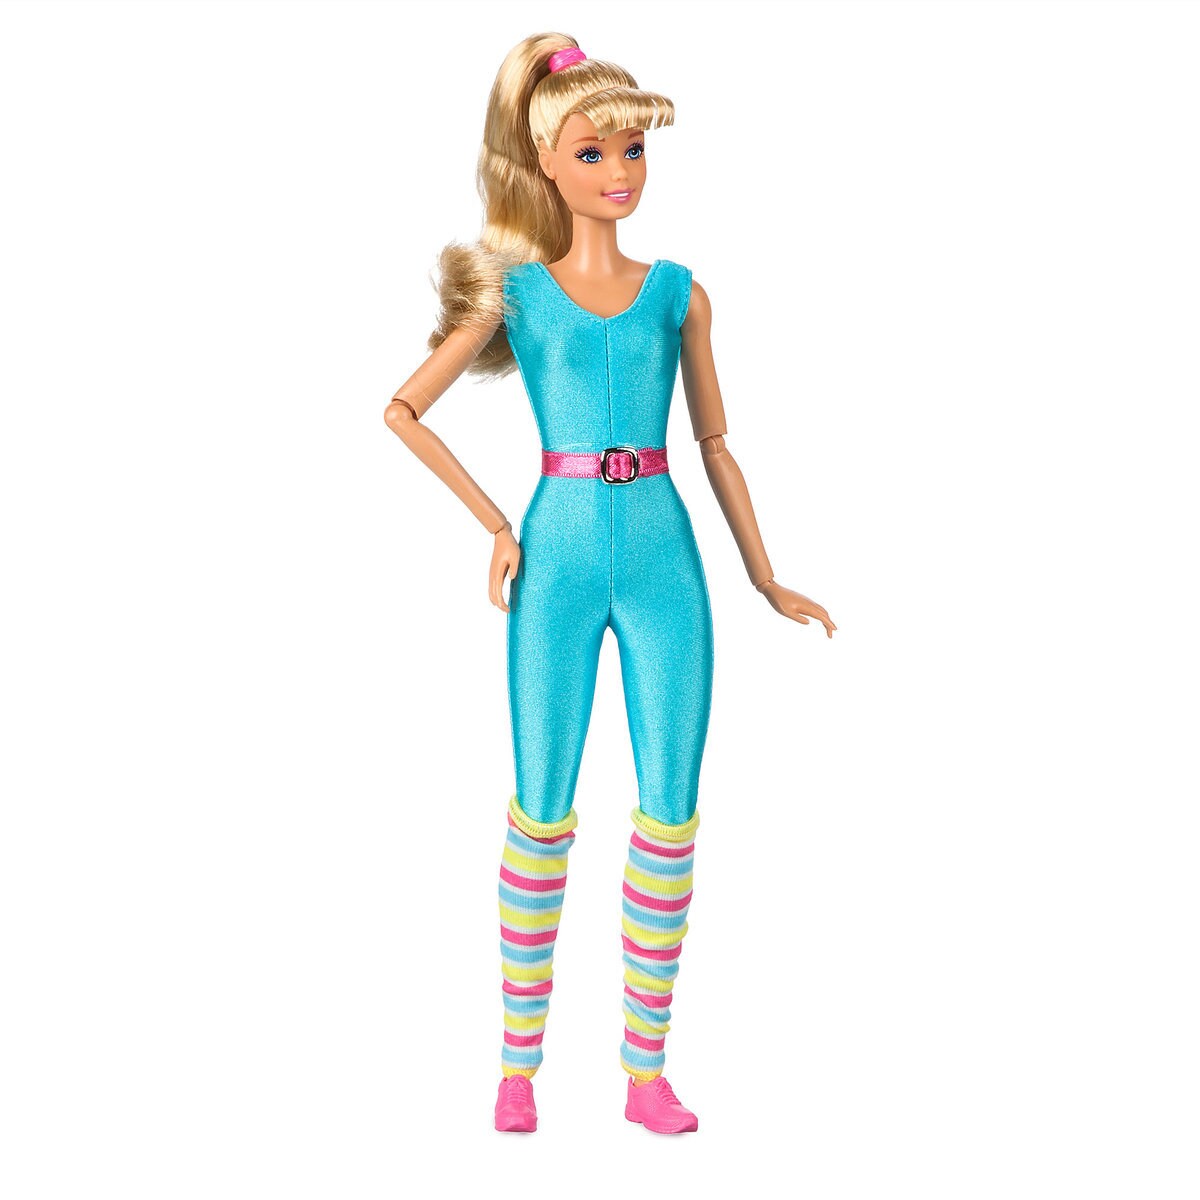 Product Image of BarbieÂ® Doll by Mattel - Toy Story 4 # 1